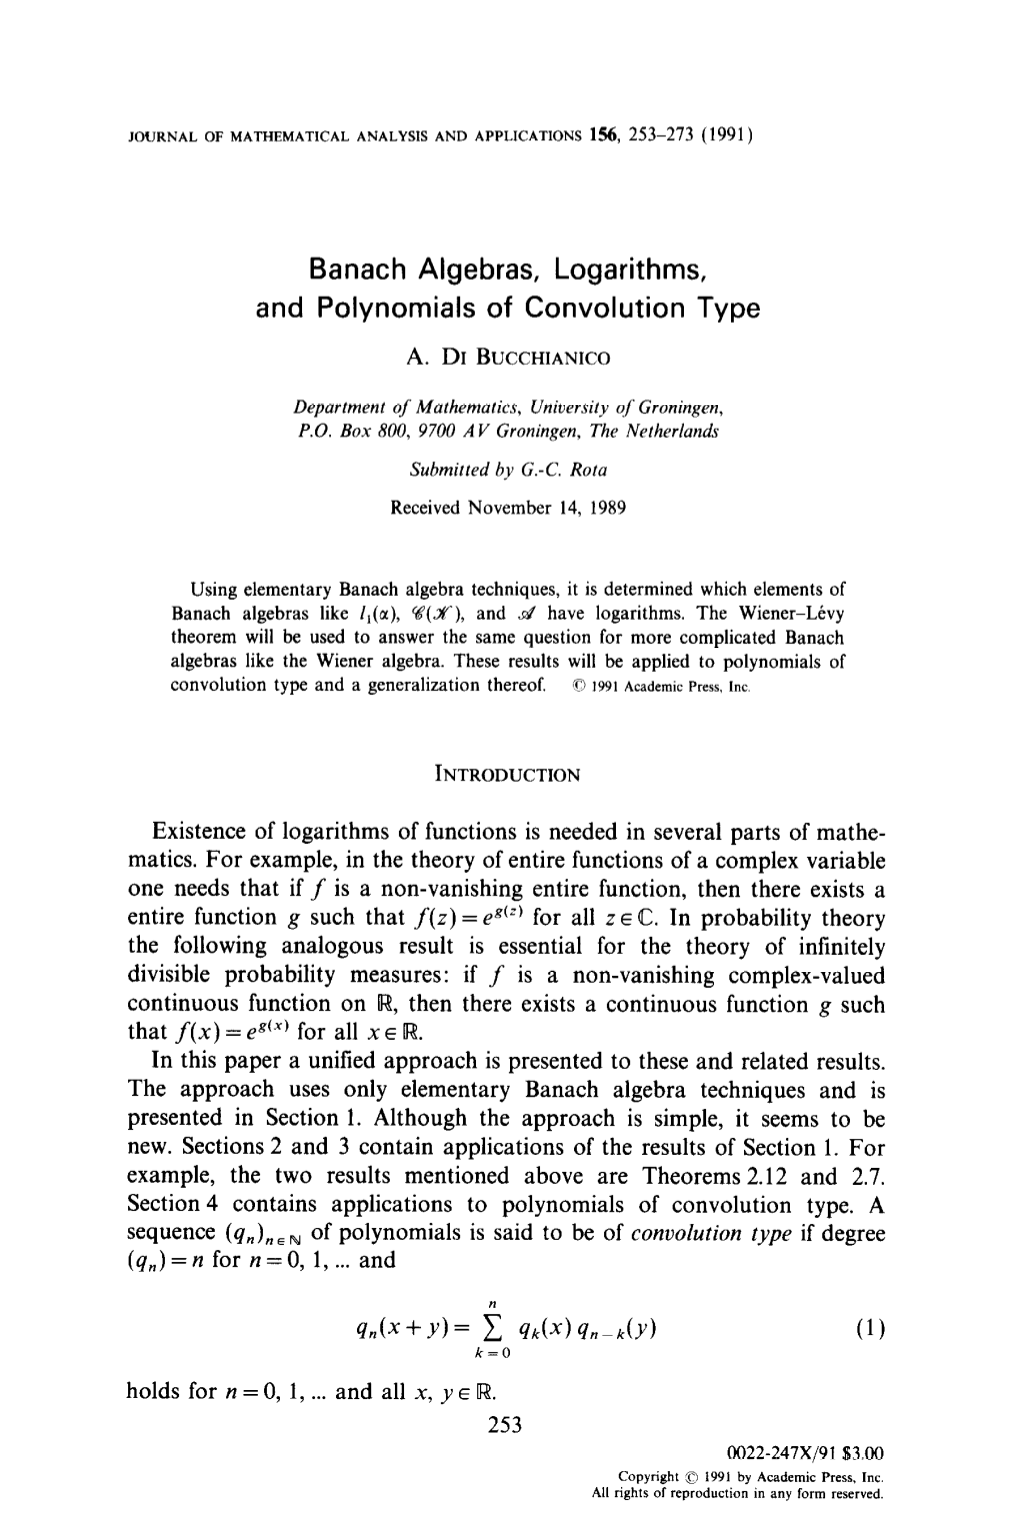 Banach Algebras, Logarithms, and Polynomials of Convolution Type